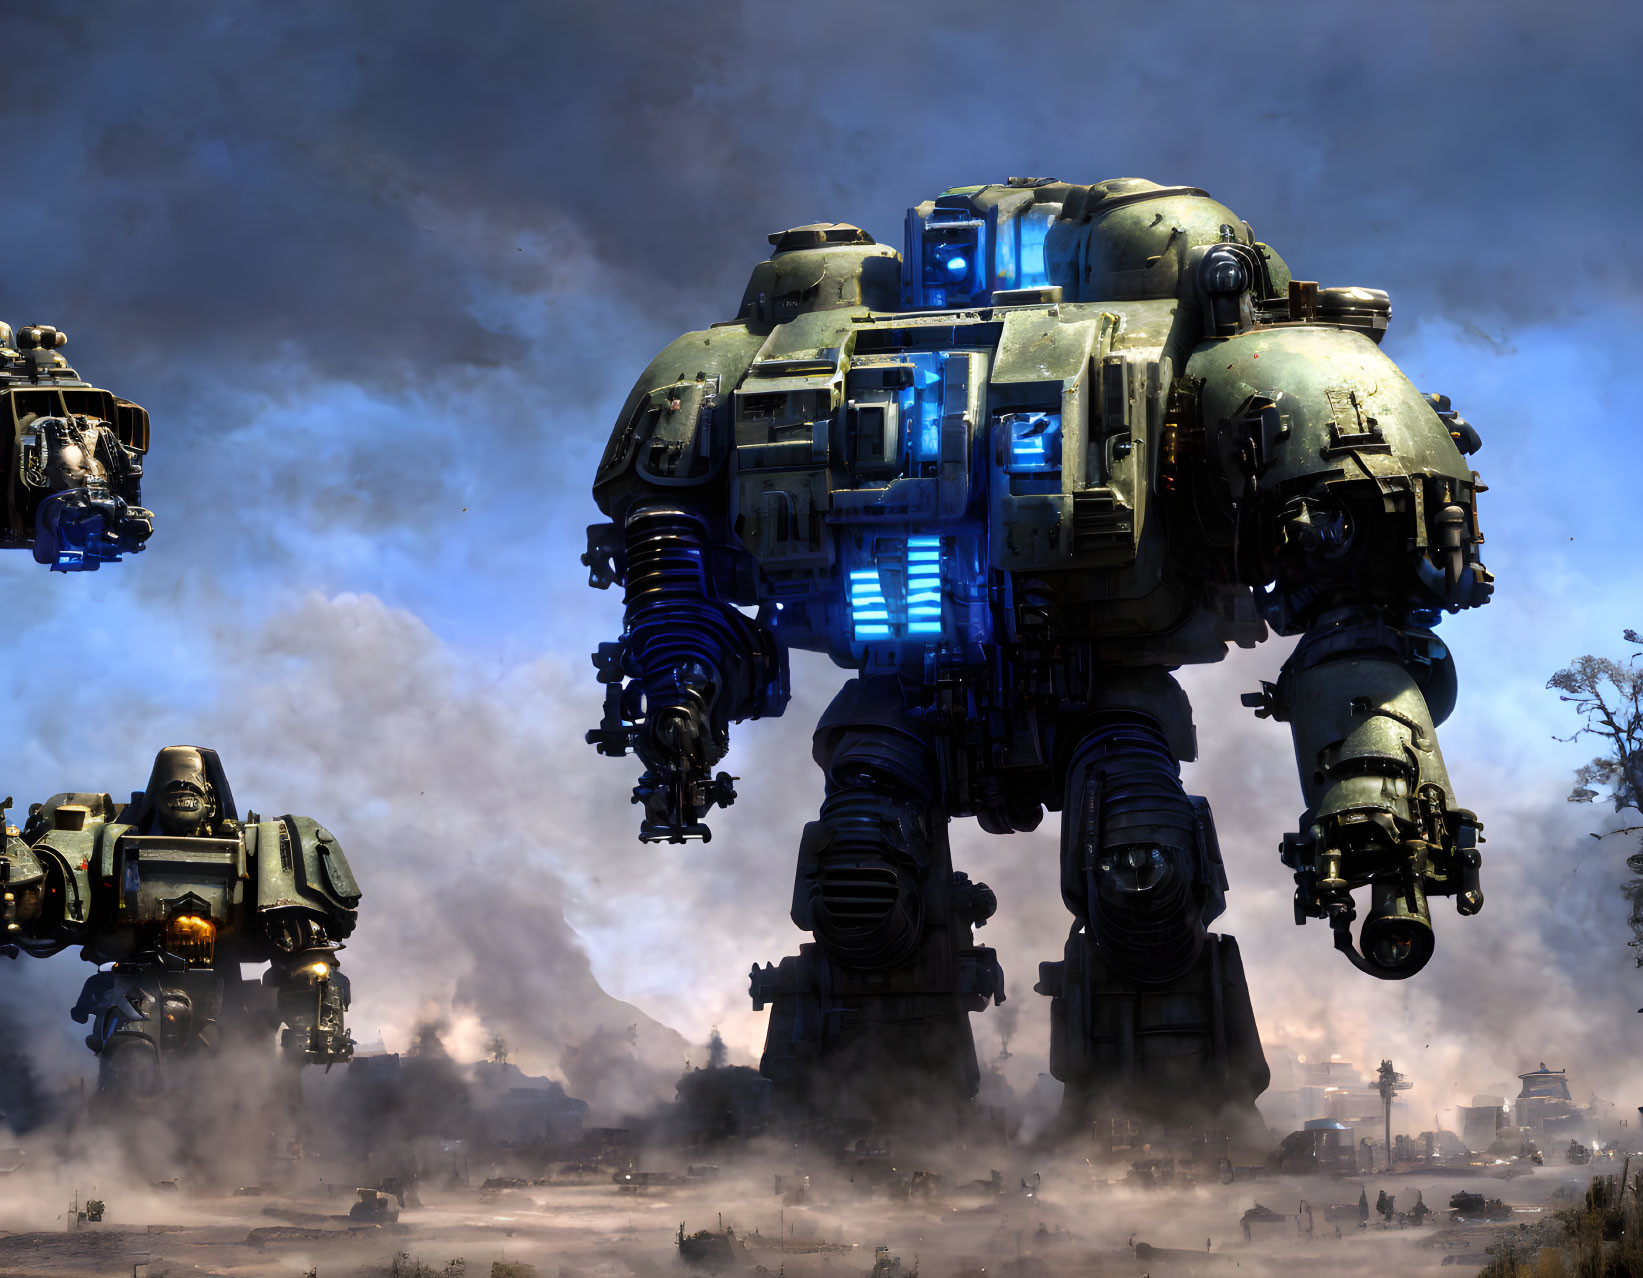 Three large armored robot mechs in smoky battlefield.